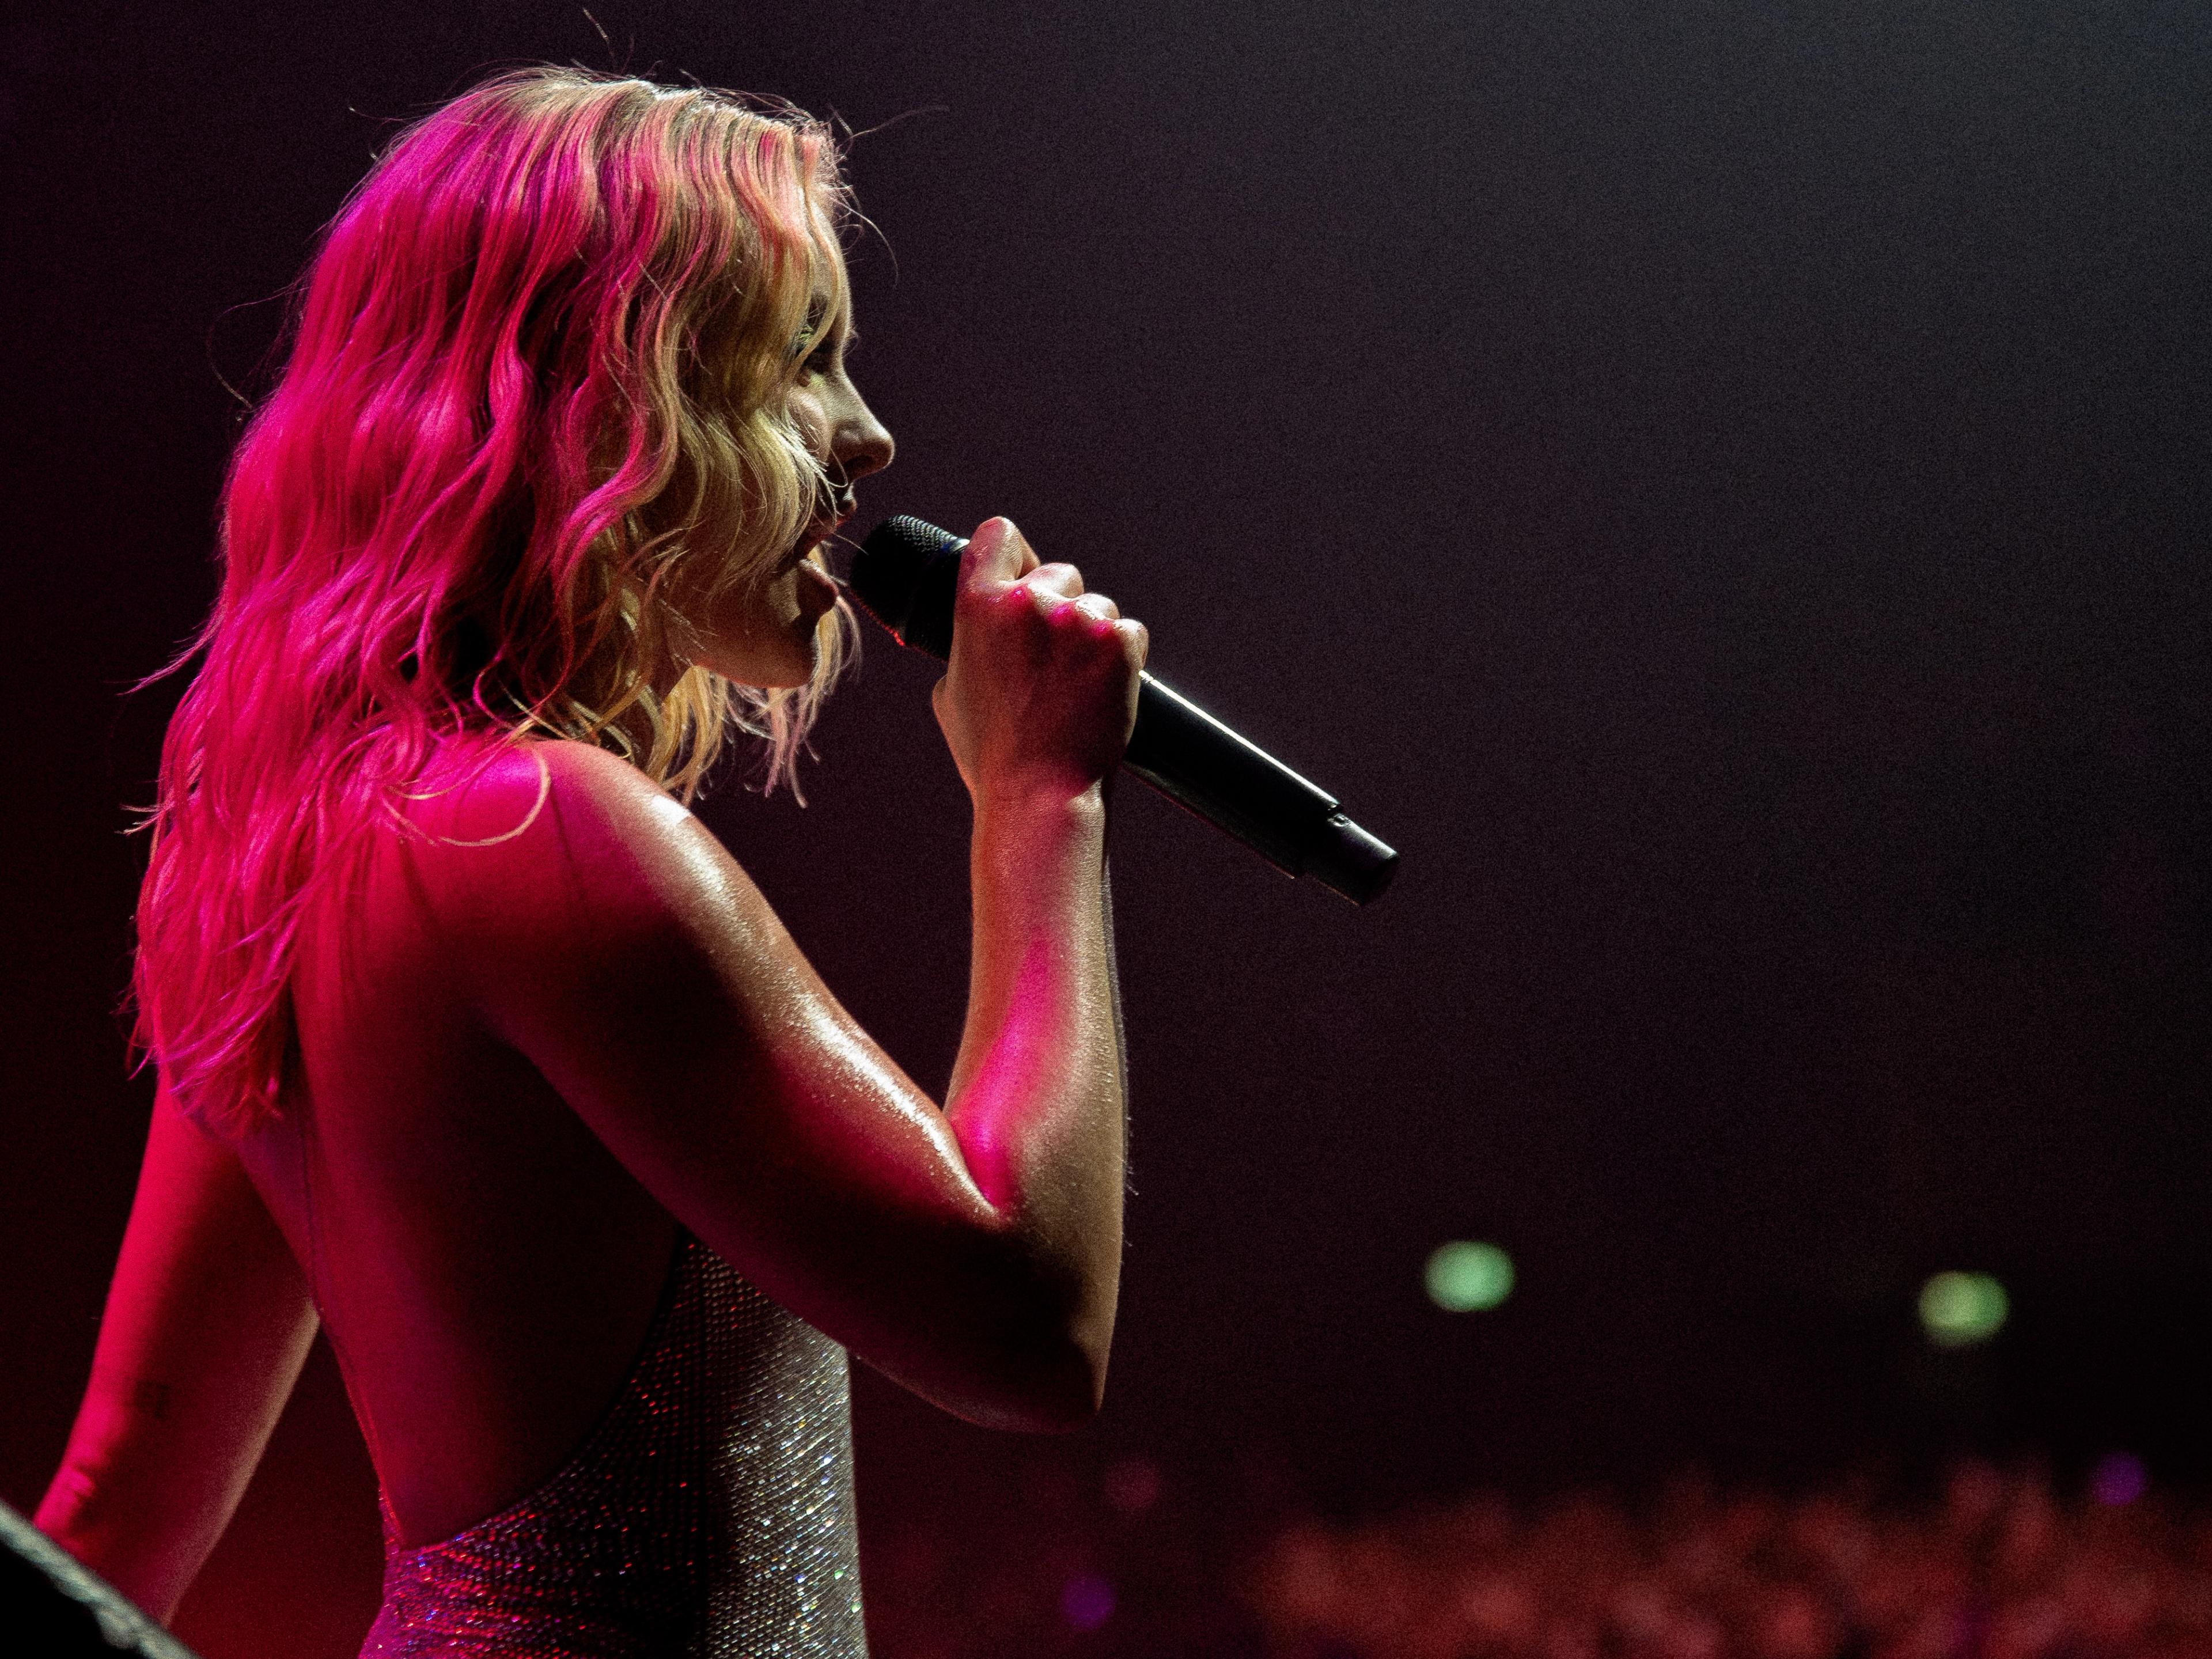 Zara Larsson singing on stage with a microphone in hand, illuminated by pink stage lights.